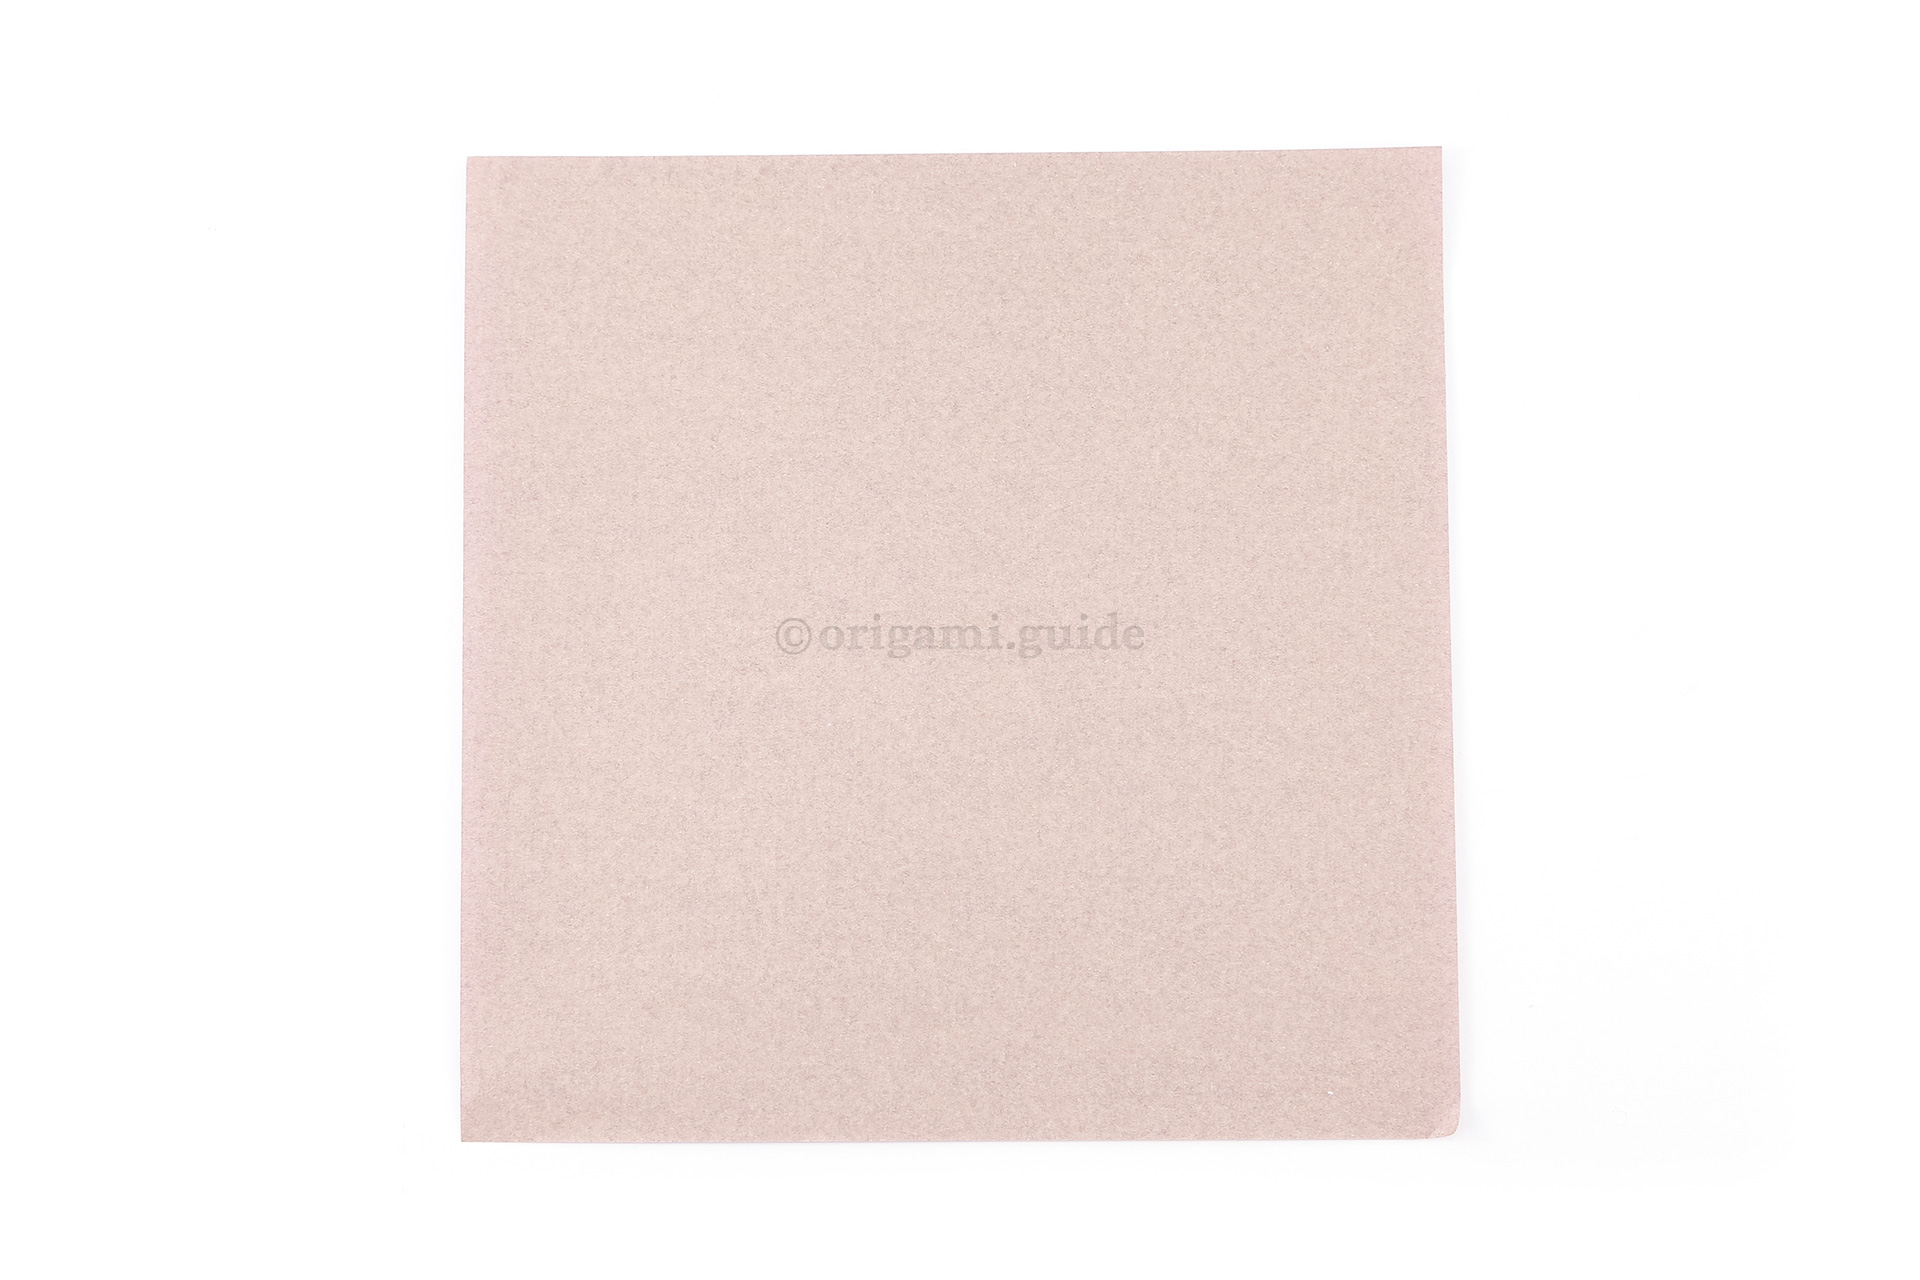 This is the front of our origami paper, our simple flower will have this colour as the petals.